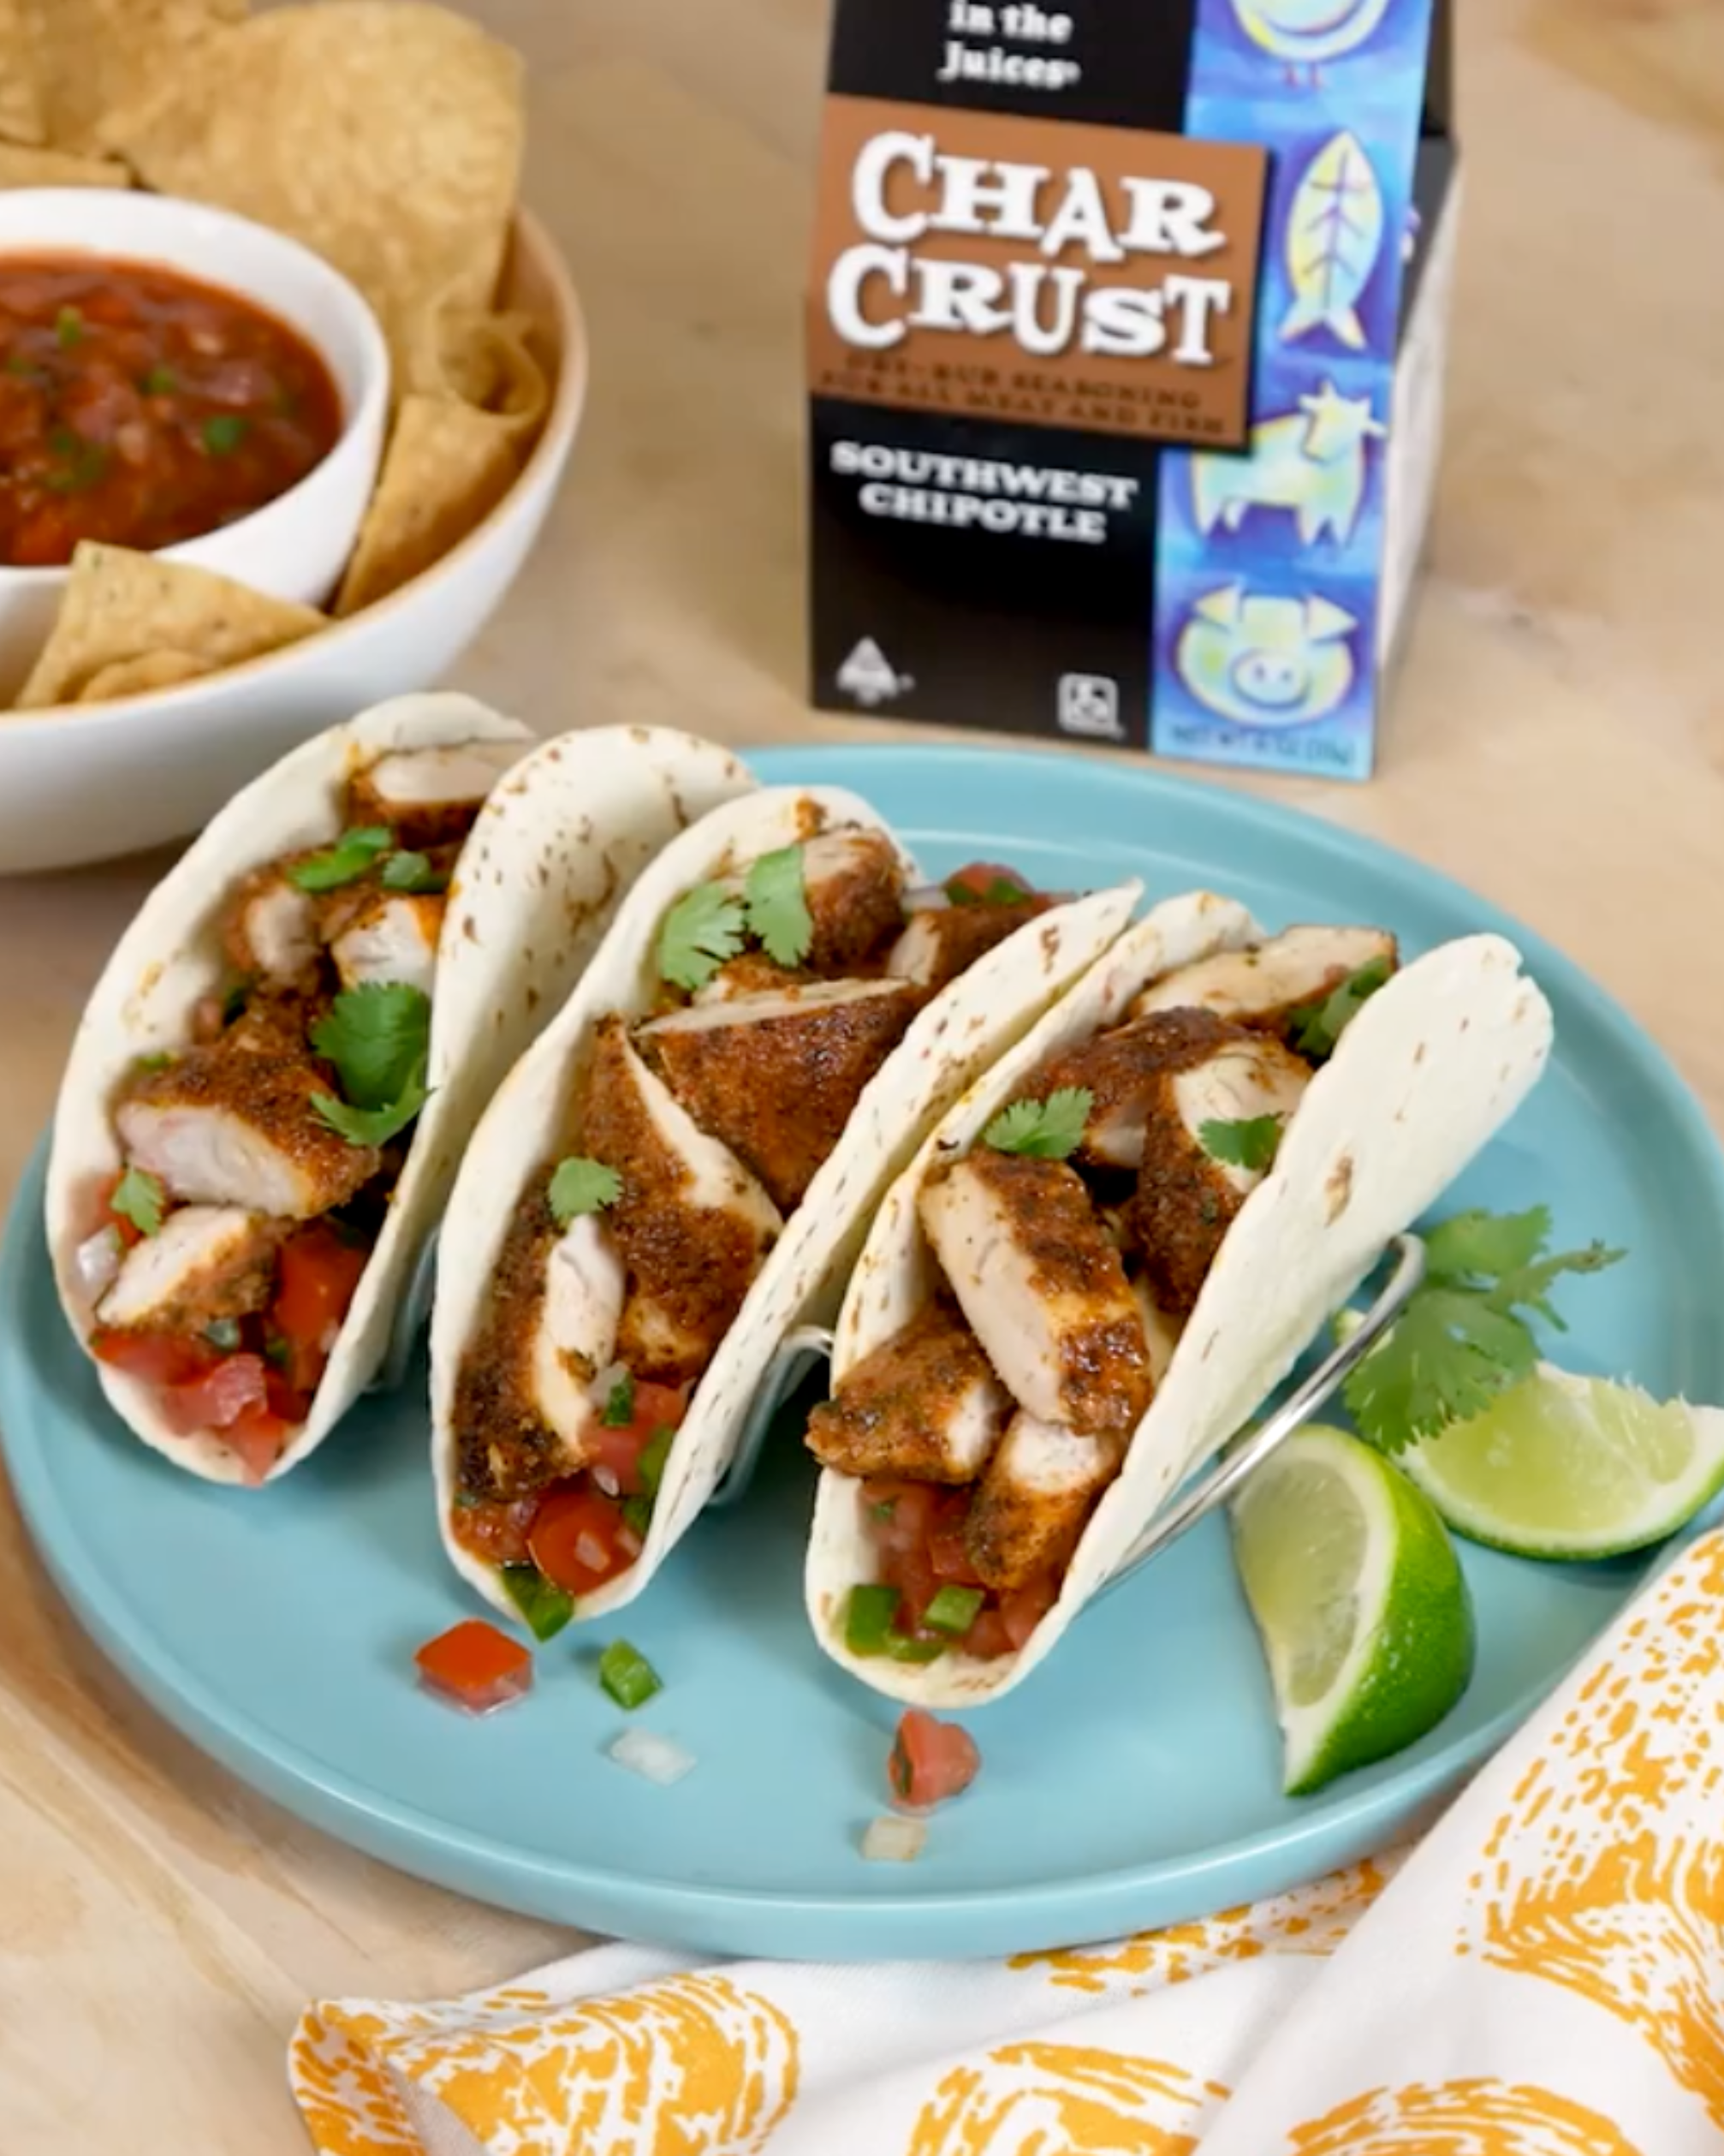 Southwest Chipotle Chicken Tacos